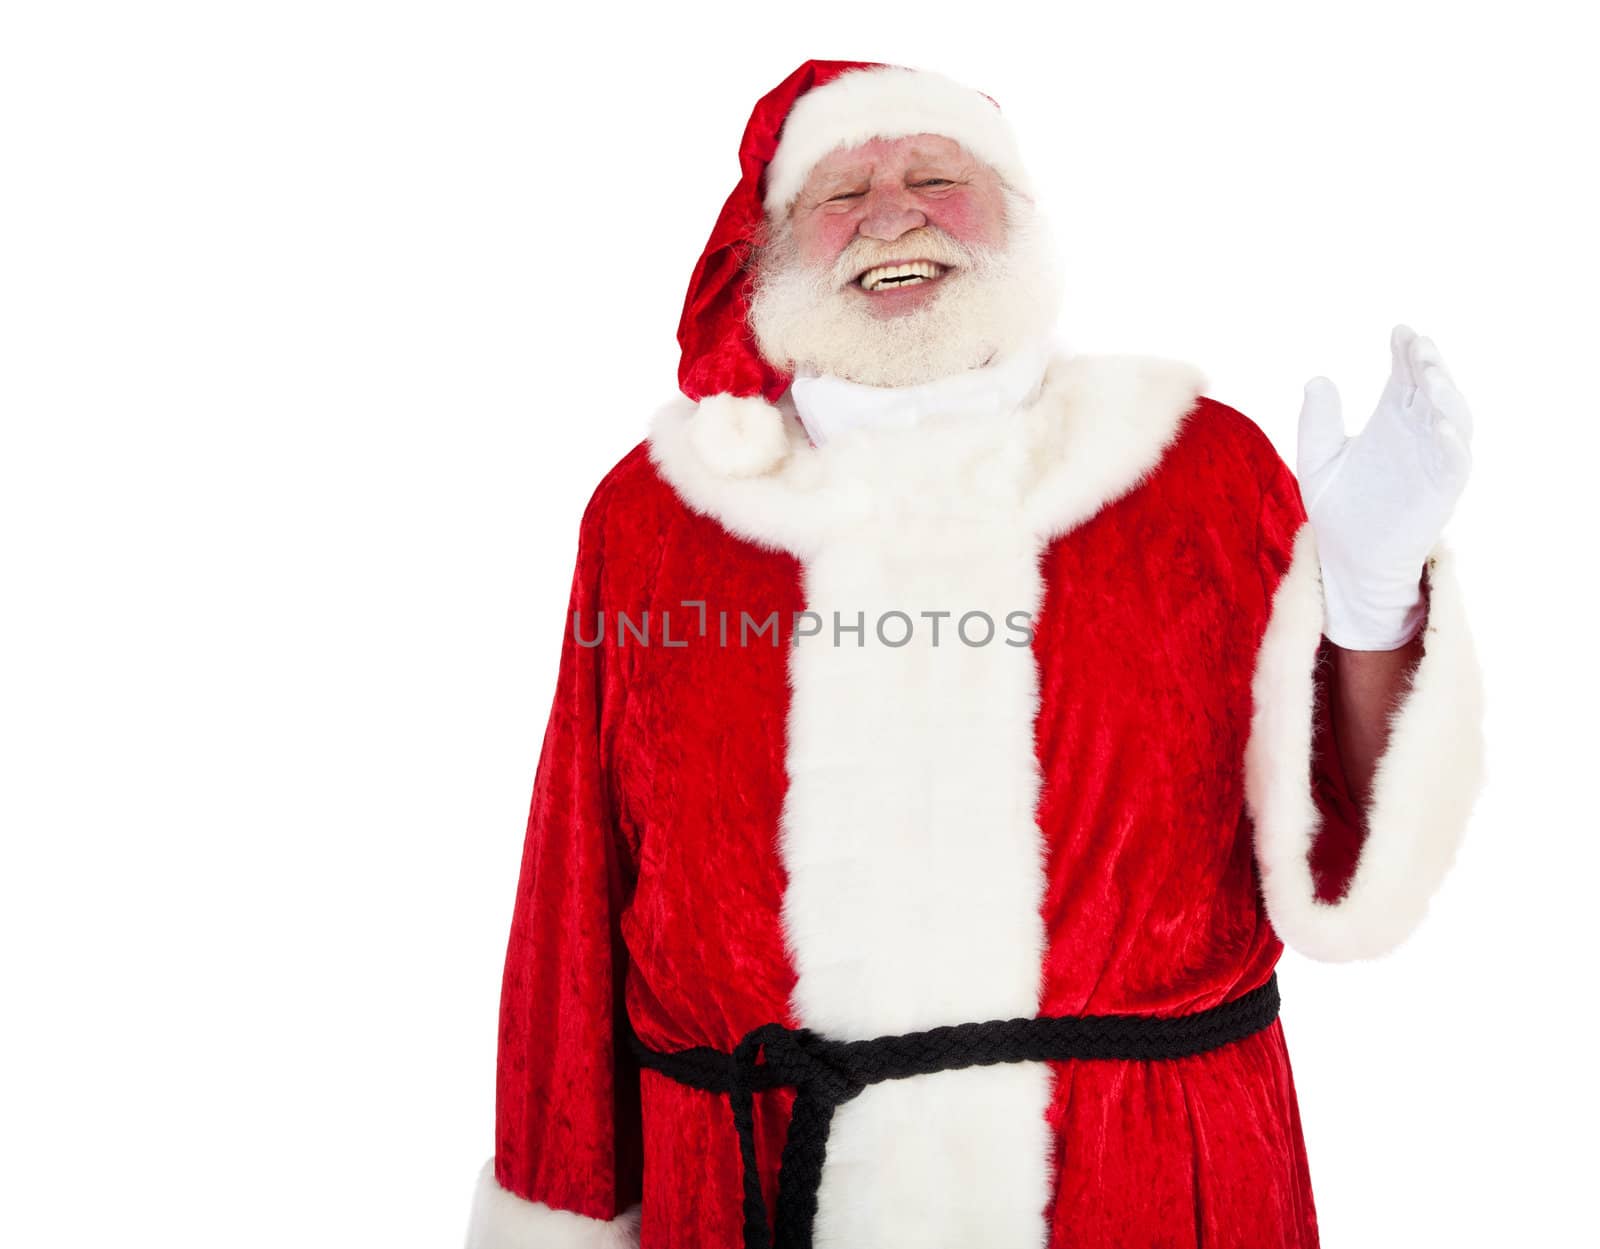 Santa Claus in authentic look waving hand. All on white background.